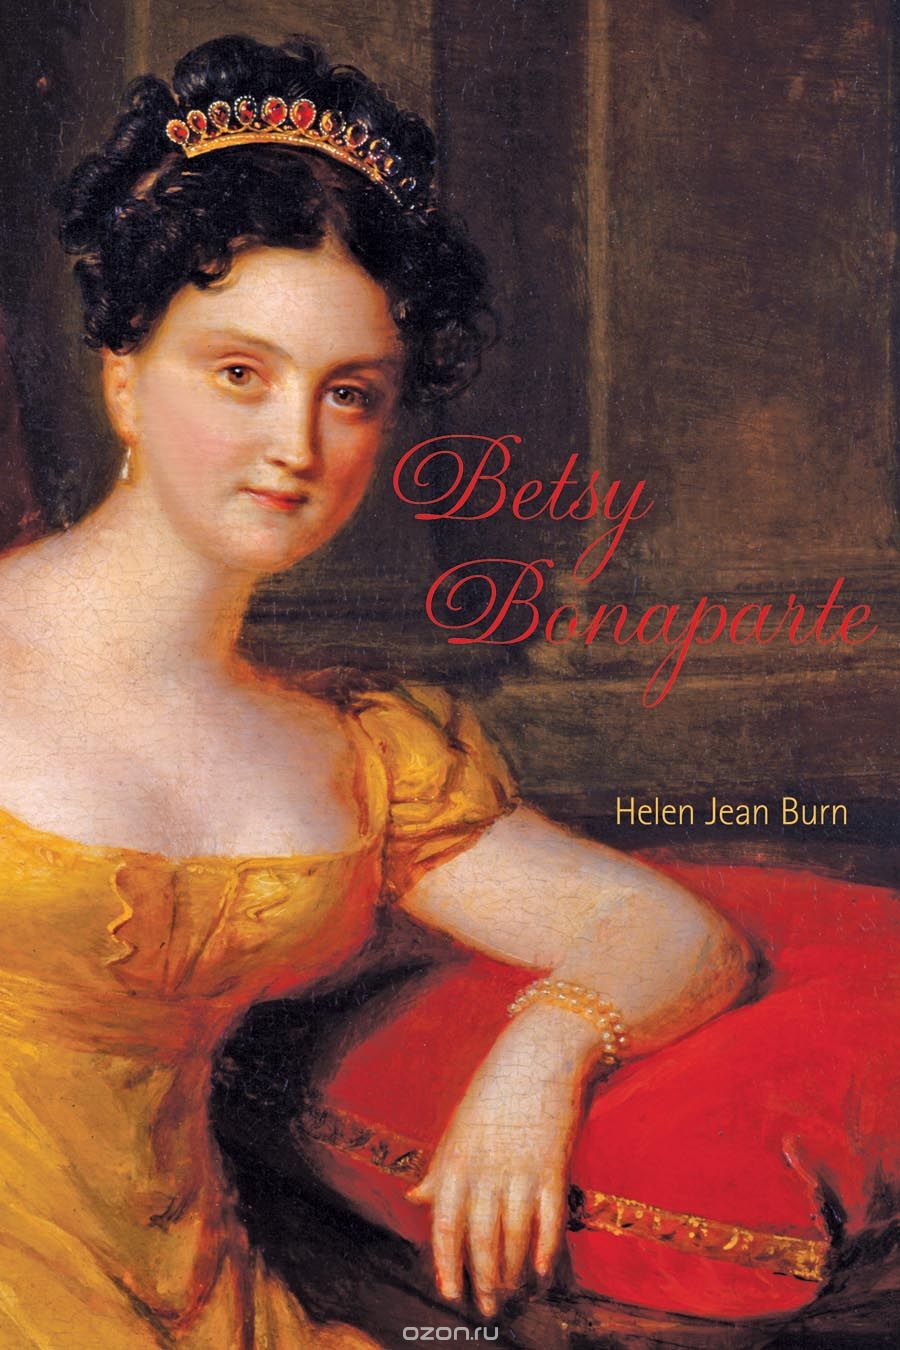 Betsy Bonaparte – The Belle of Baltimore